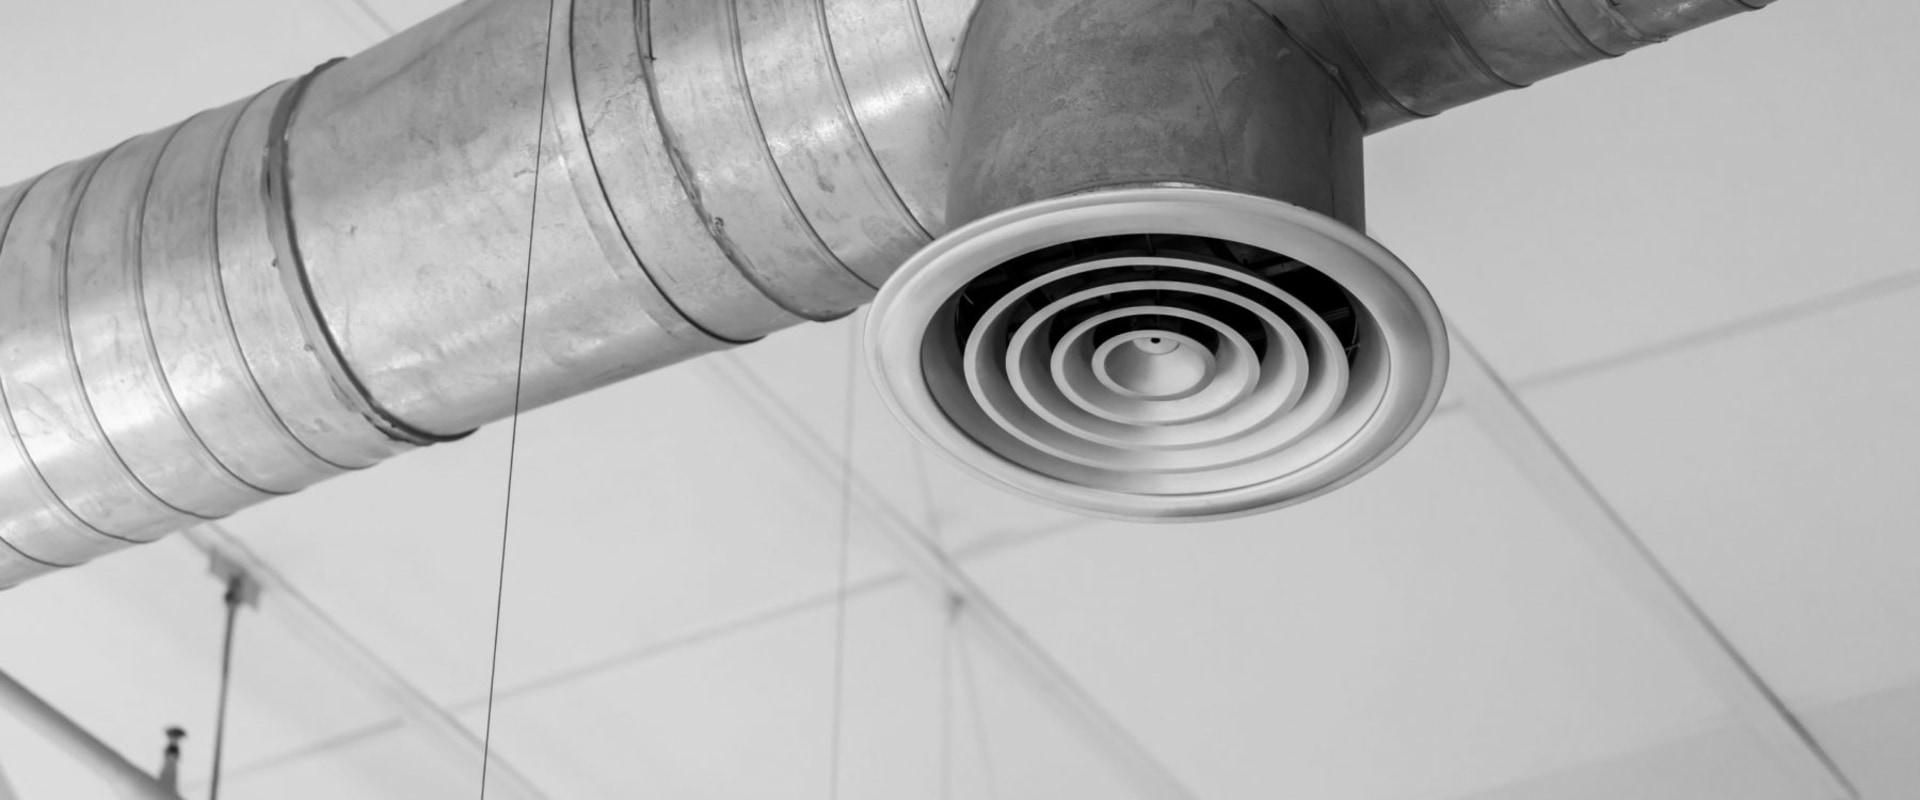 What Kind of Testing Should be Done After Professional Air Vent Sealing Service?